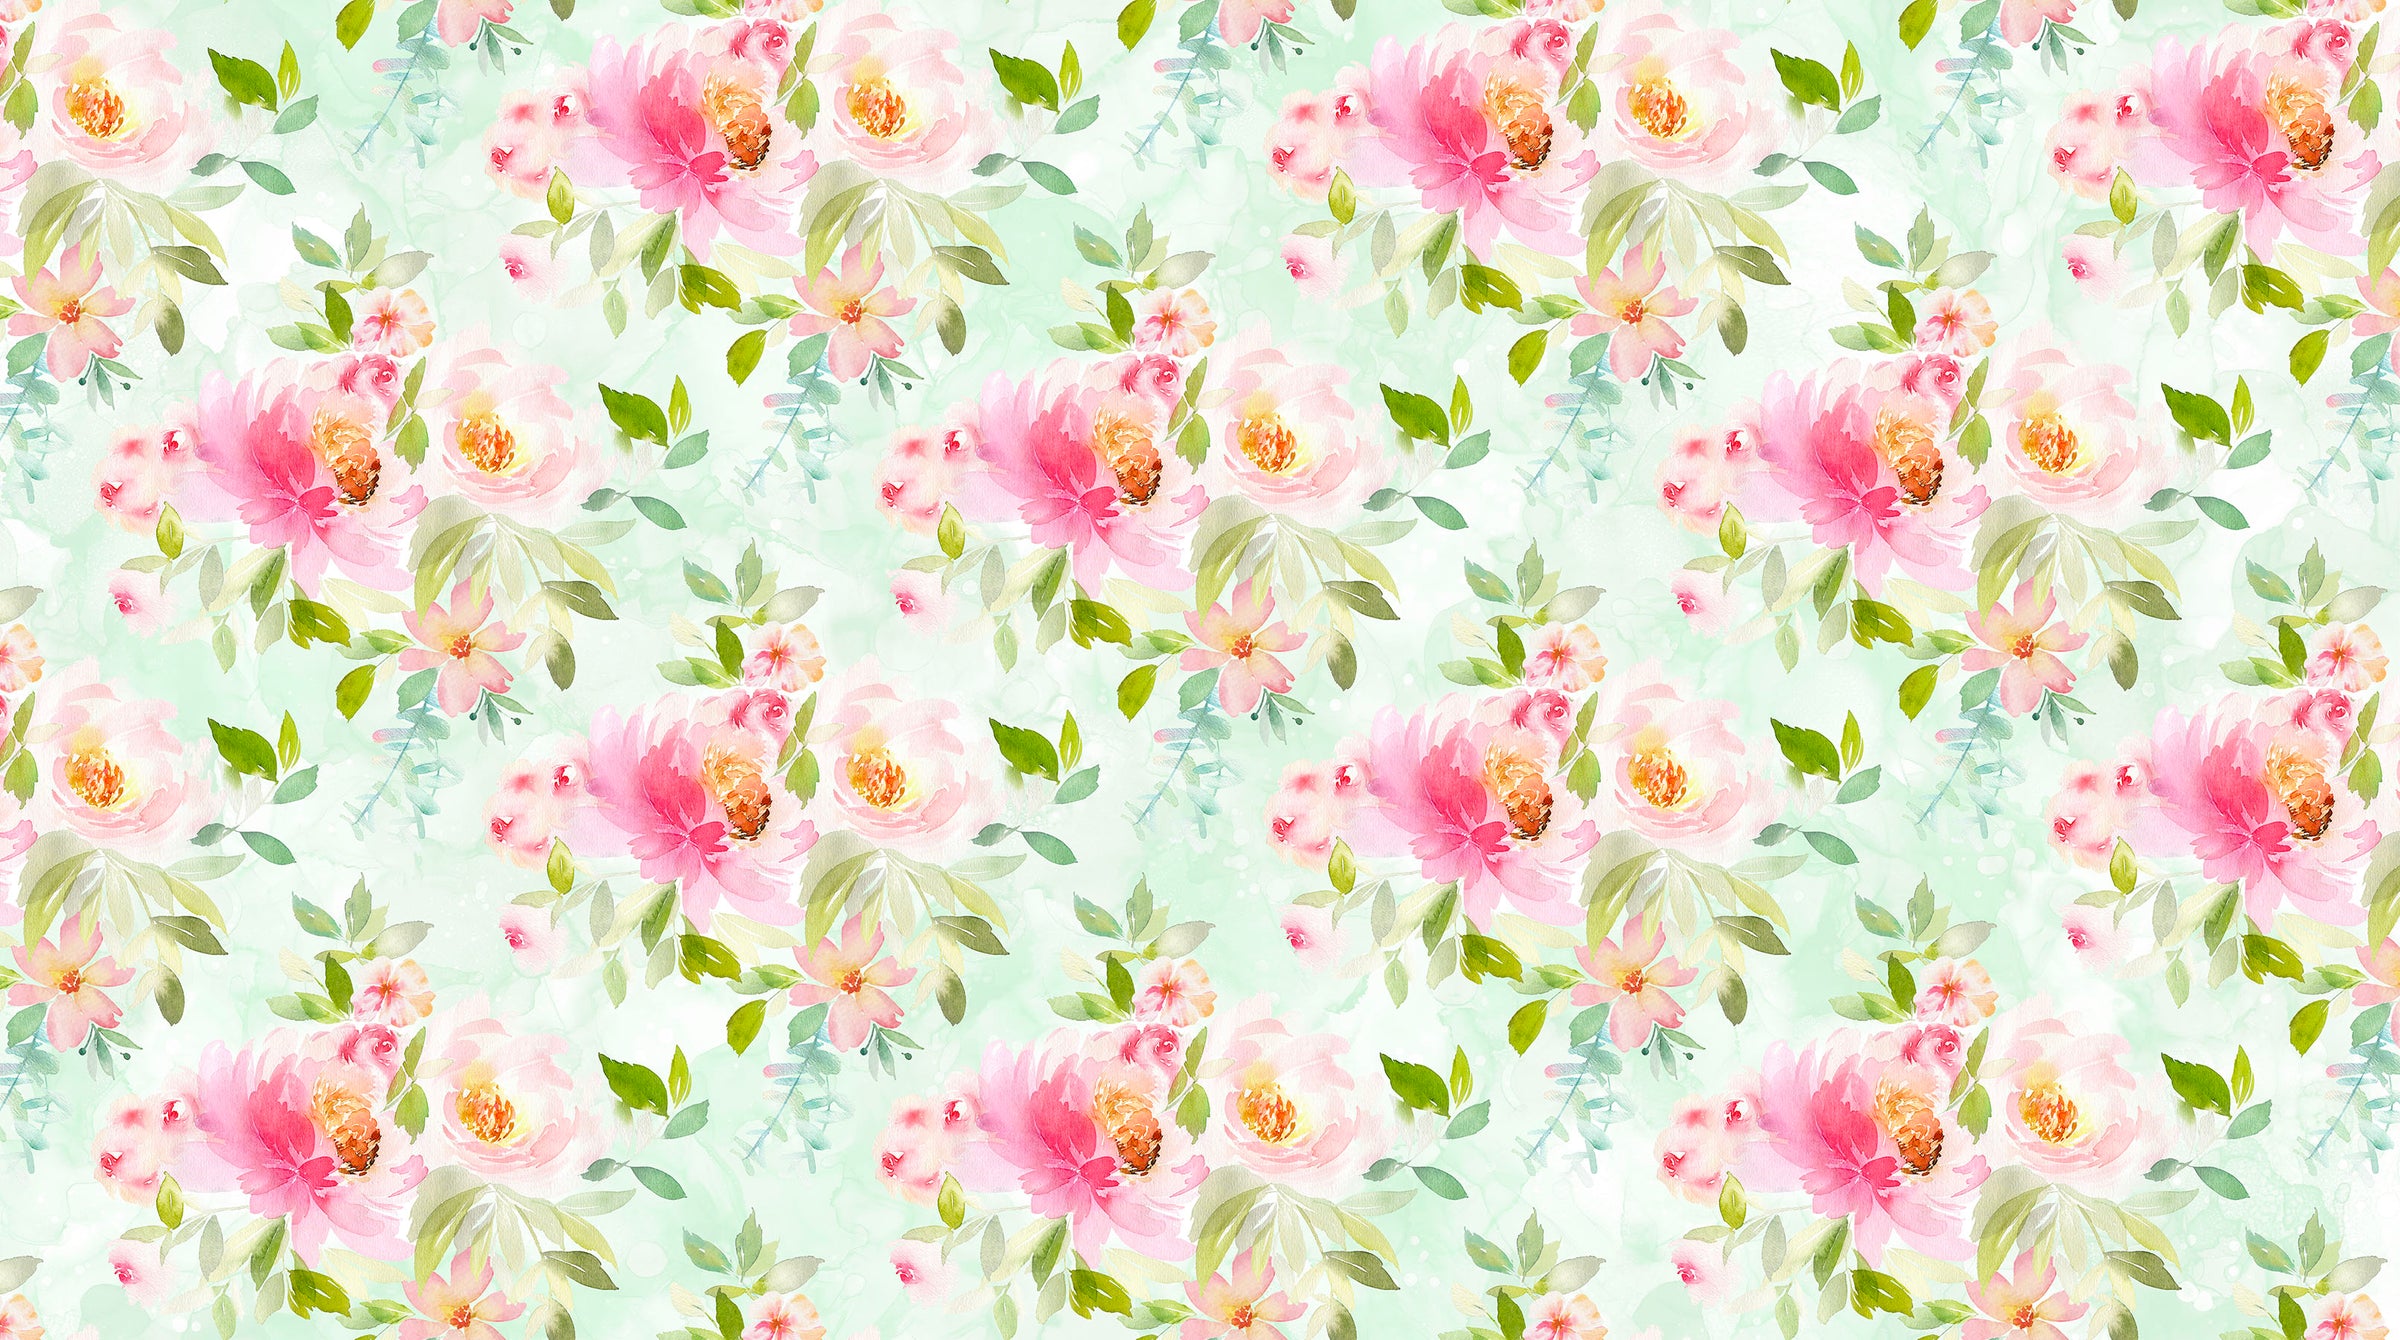 Sweet Surrender Quilt Fabric - Floral Bouquet in Seafoam Green/Multi - 26946-71